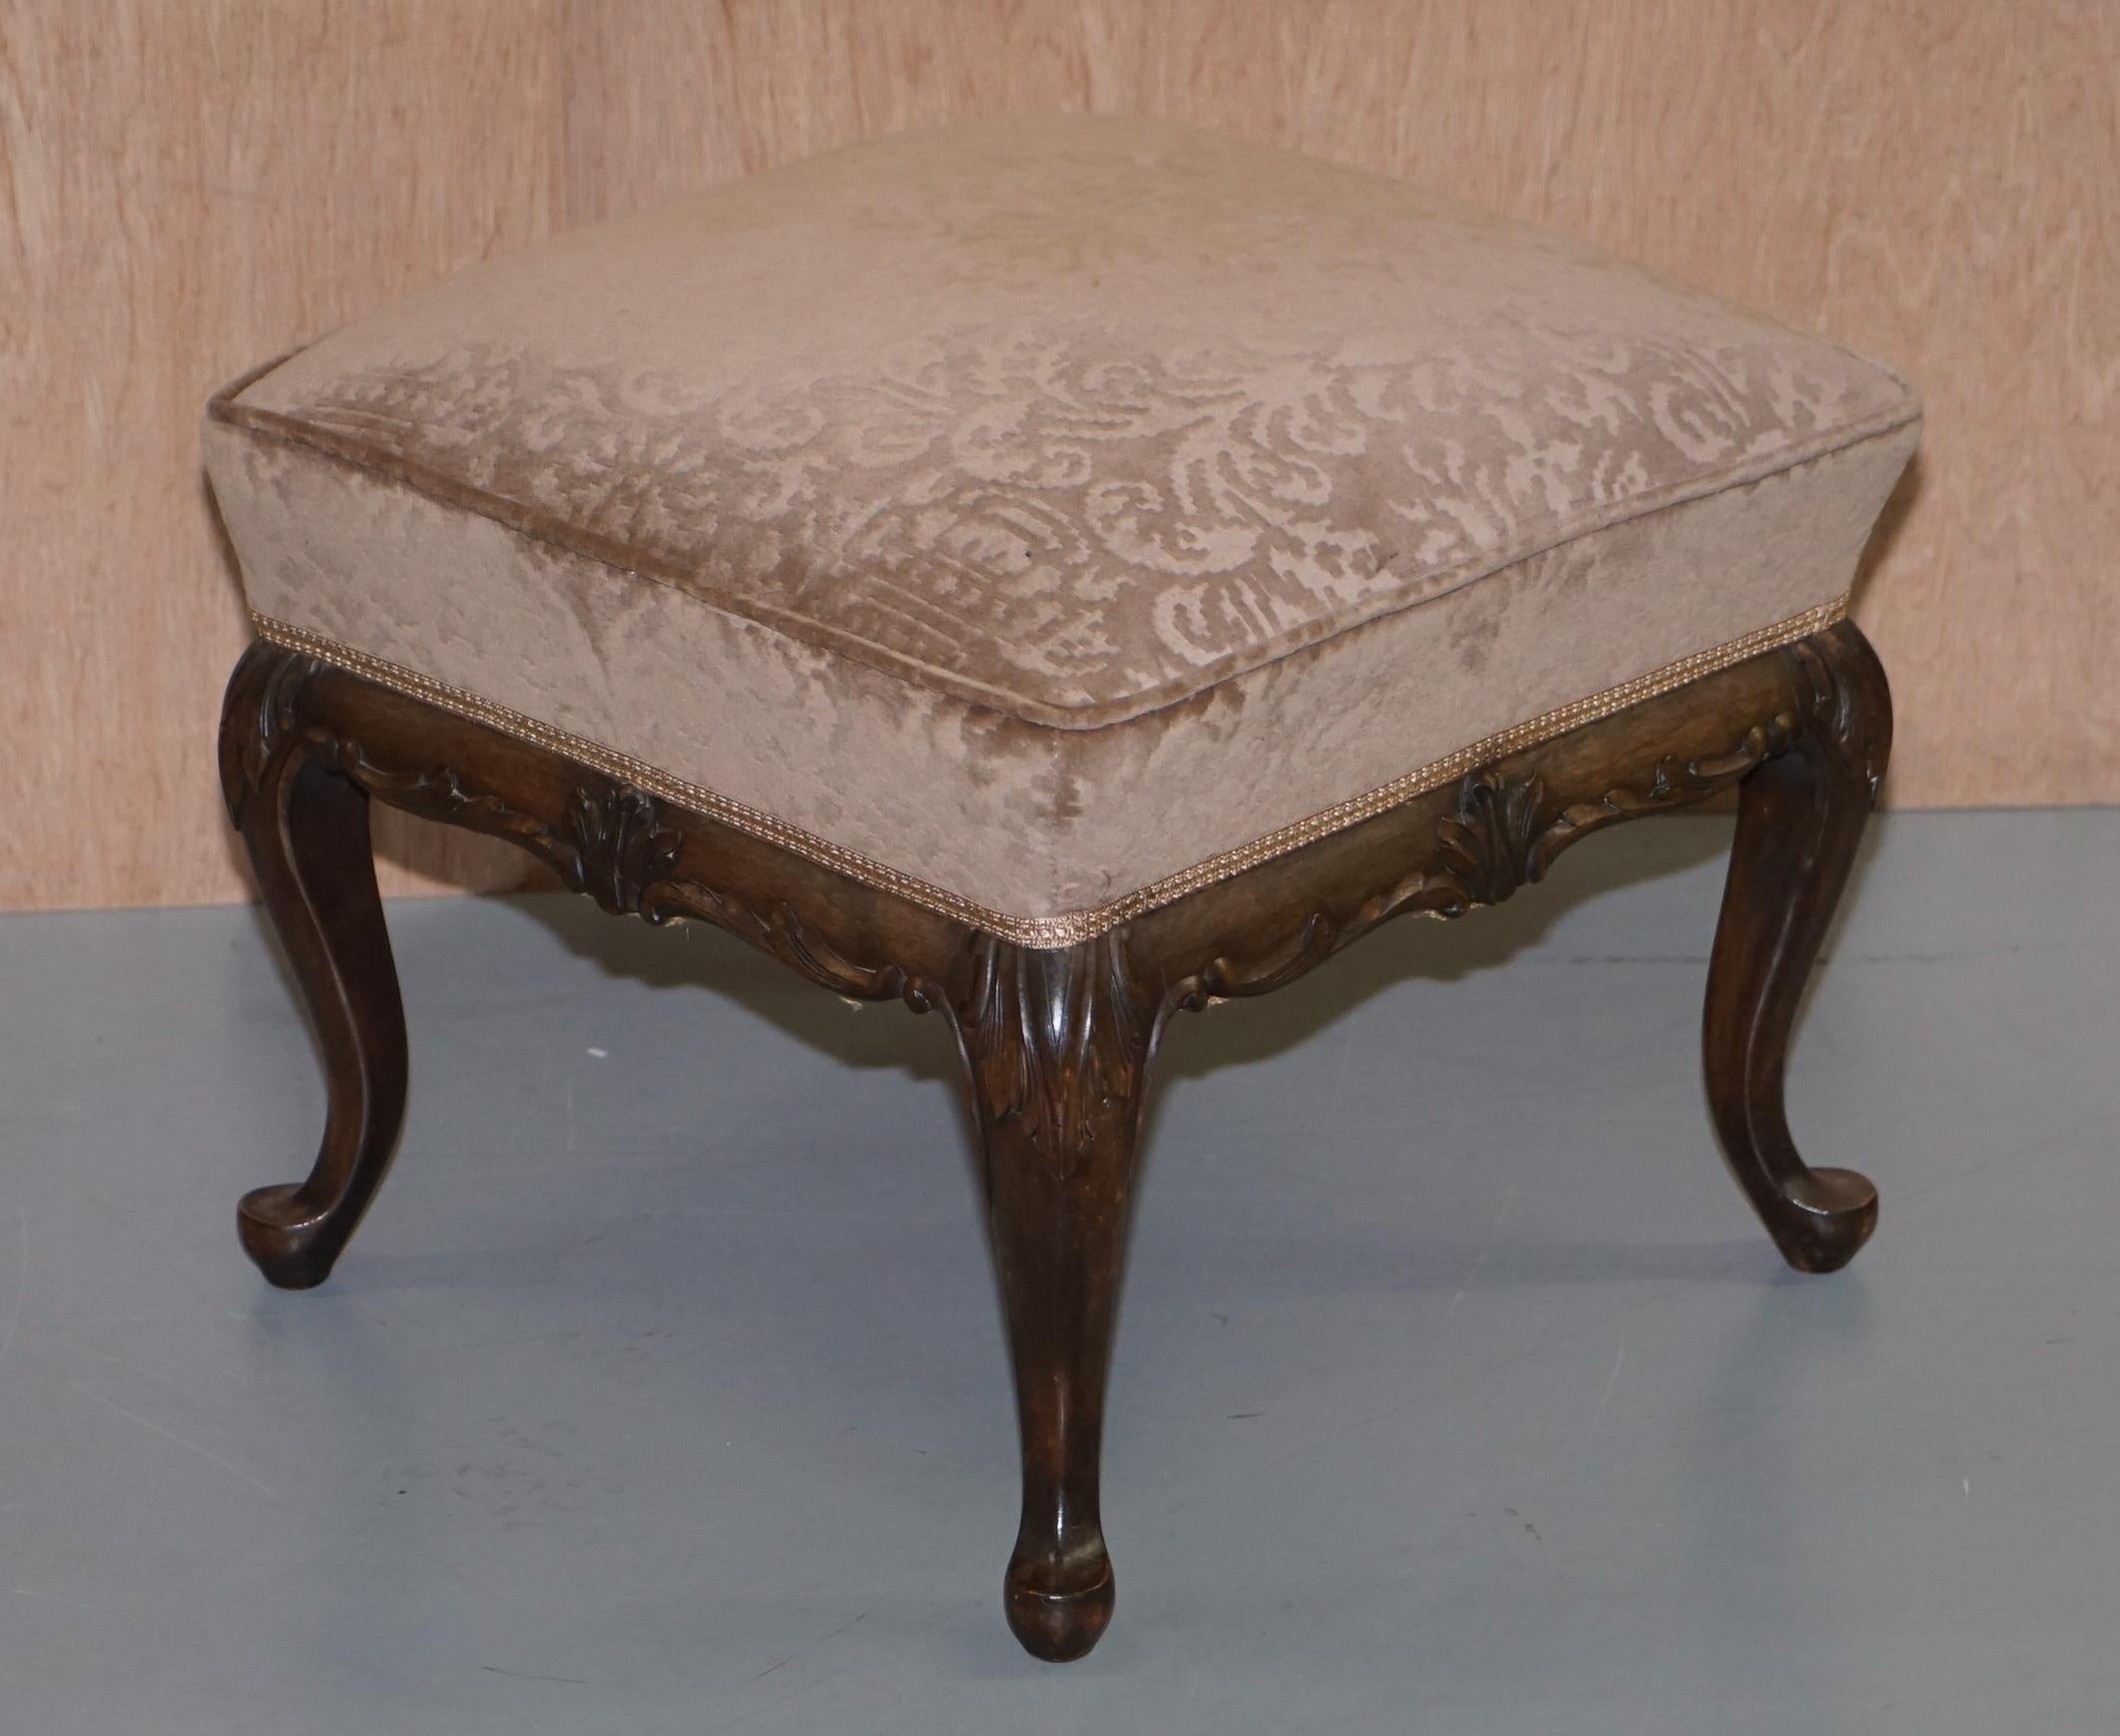 We are delighted to offer for sale this stunning pair of early Victorian hand carved in solid mahogany footstool stools

These are a very high end luxurious pair of stools, they have been inspired by the early 18th century Georgian Irish pieces